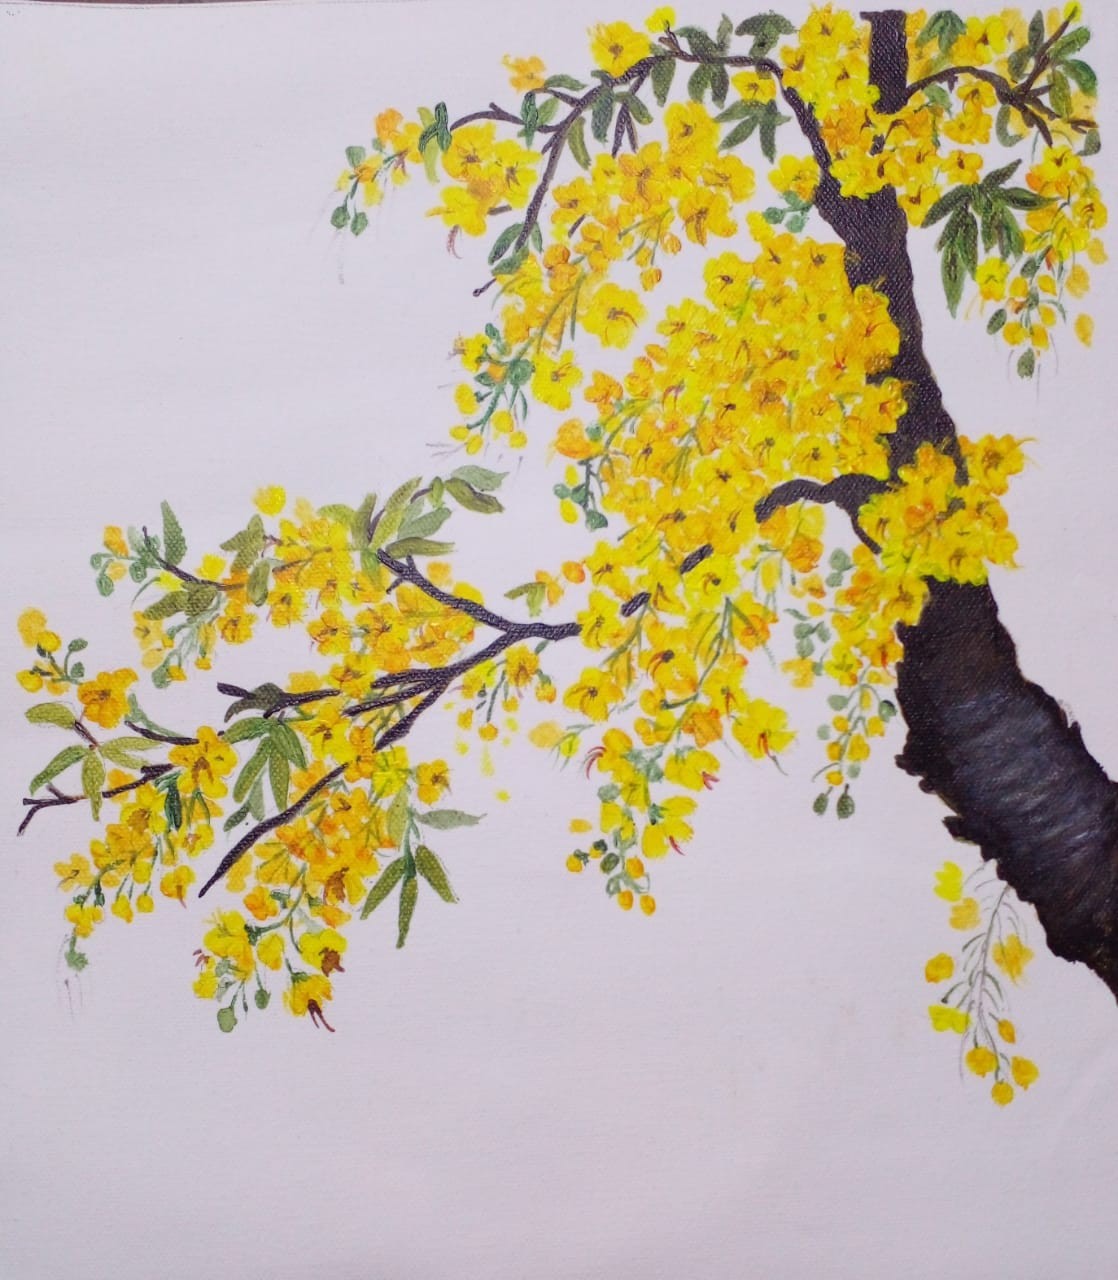 Canopy of Yellow Blooms by Kalyani Weerasinghe